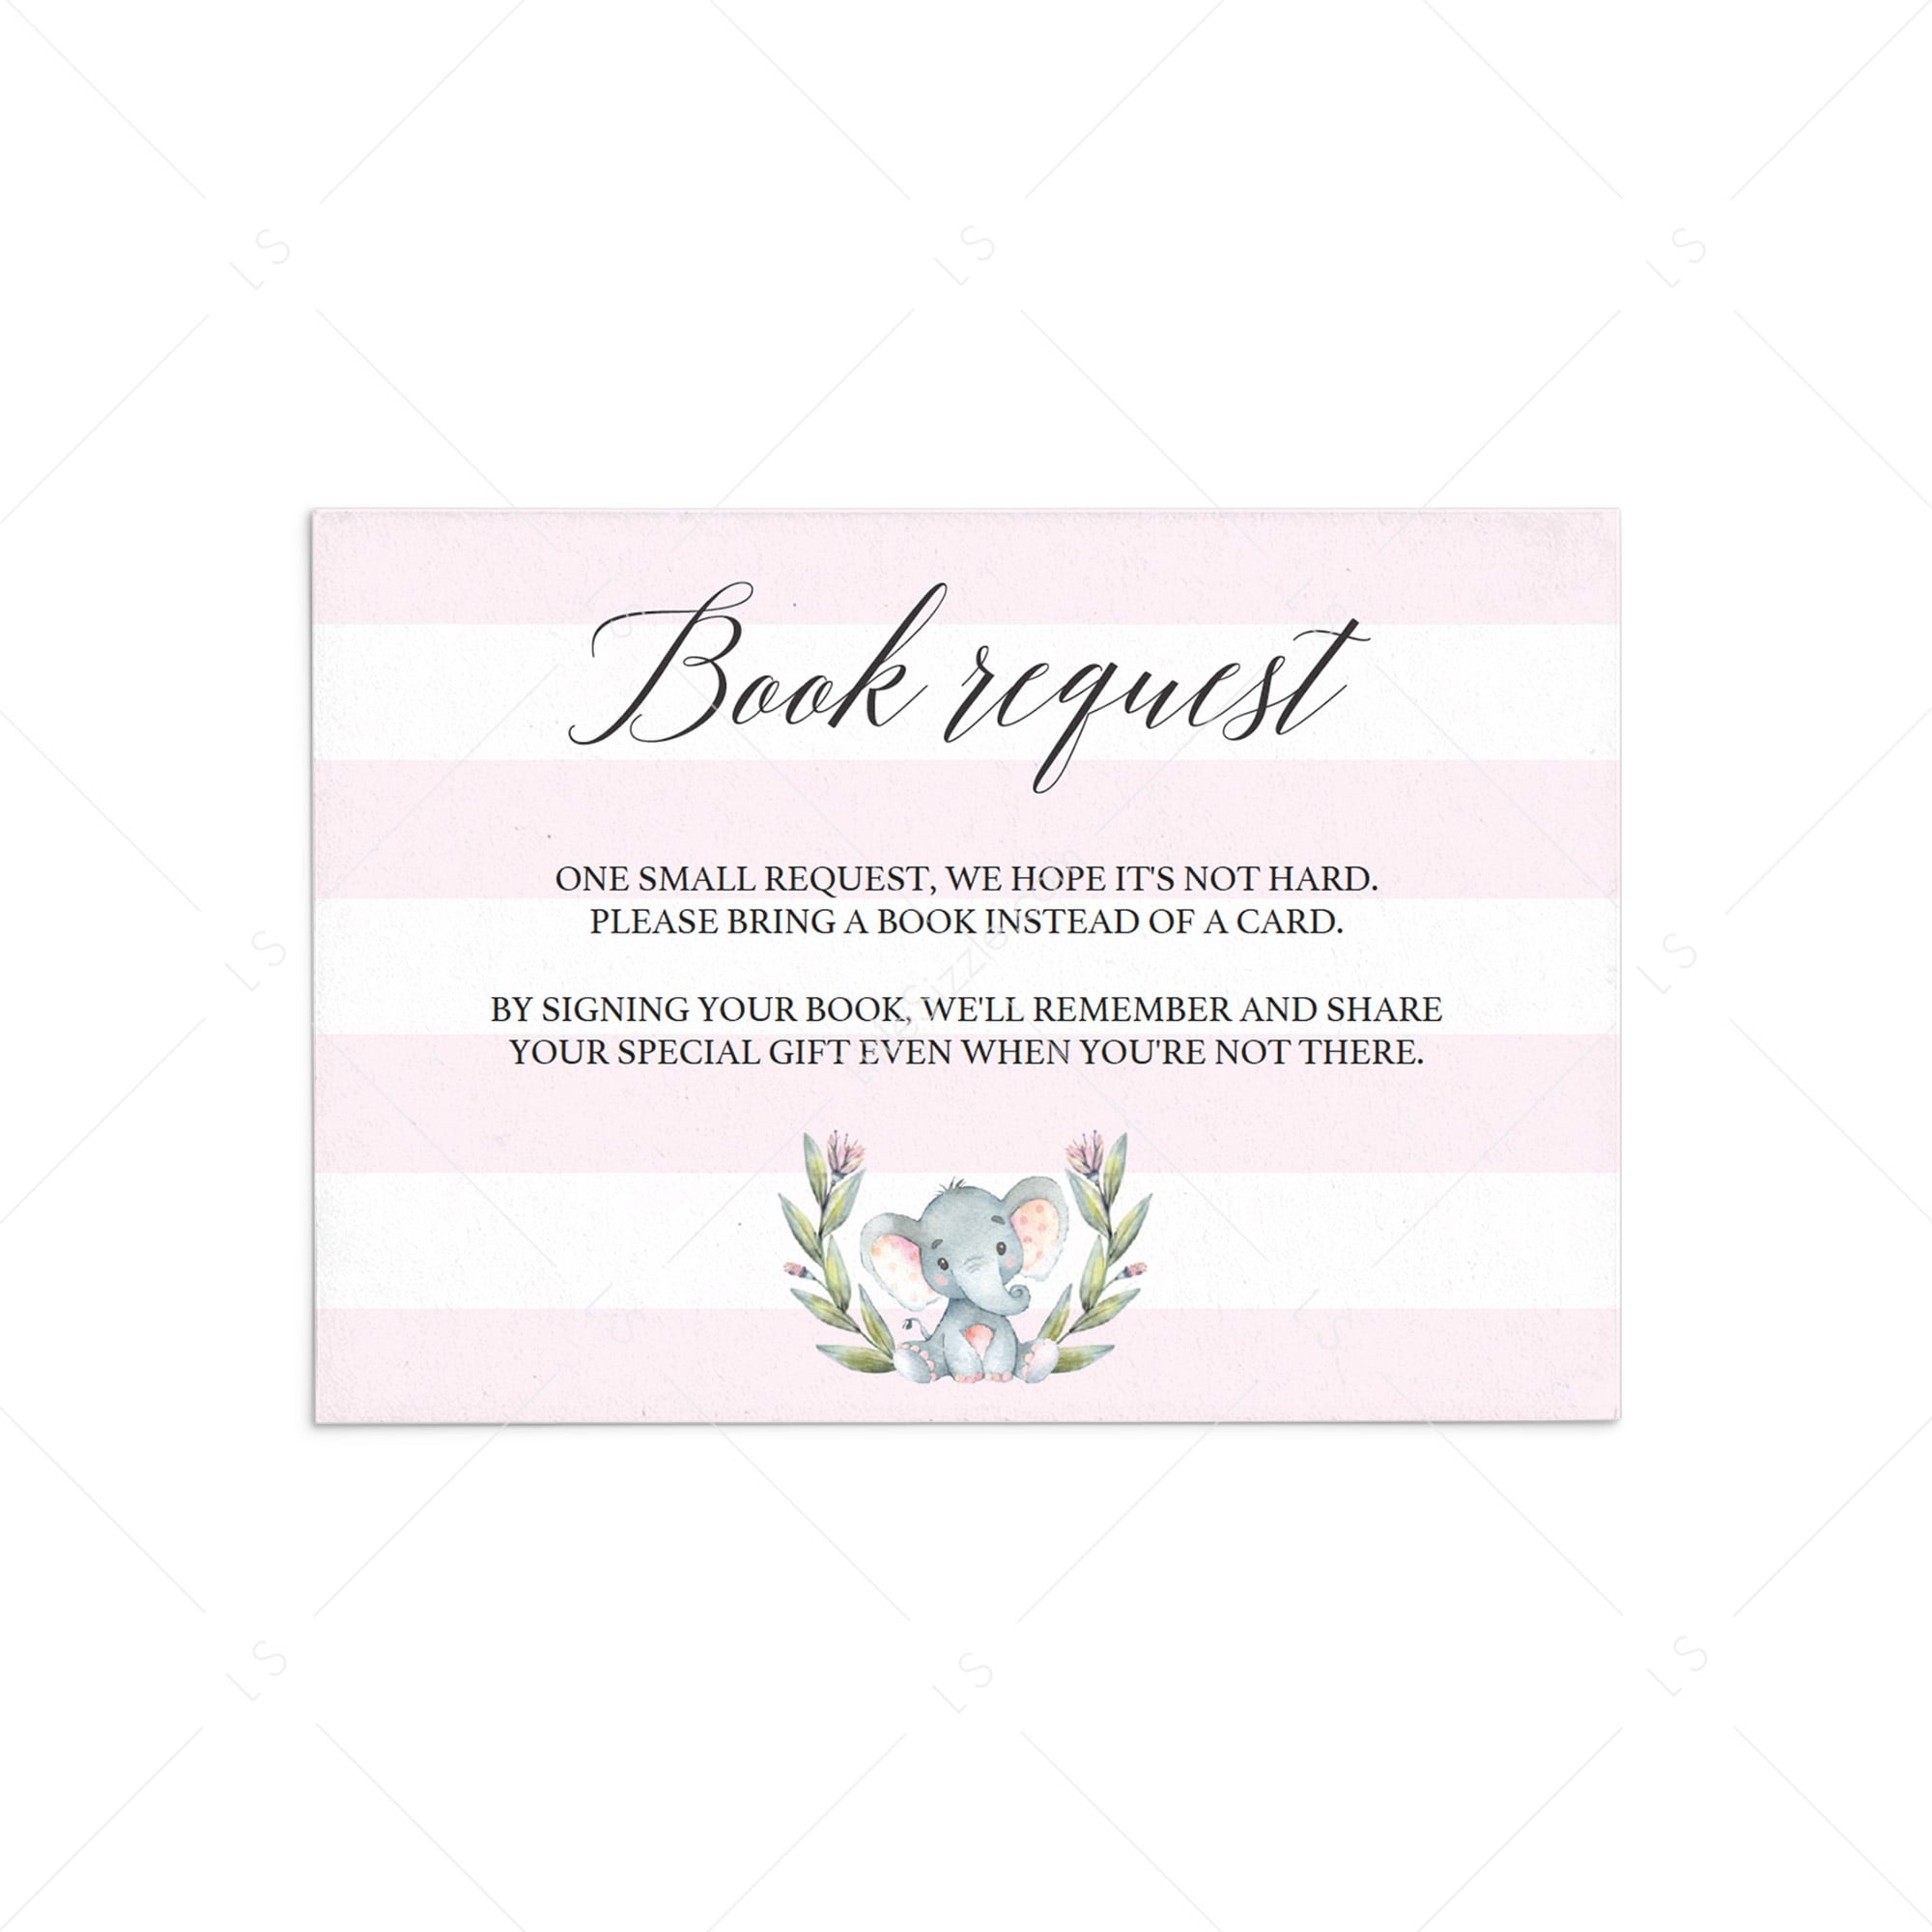 Bring a book instead of a card baby shower printable for girls by LittleSizzle